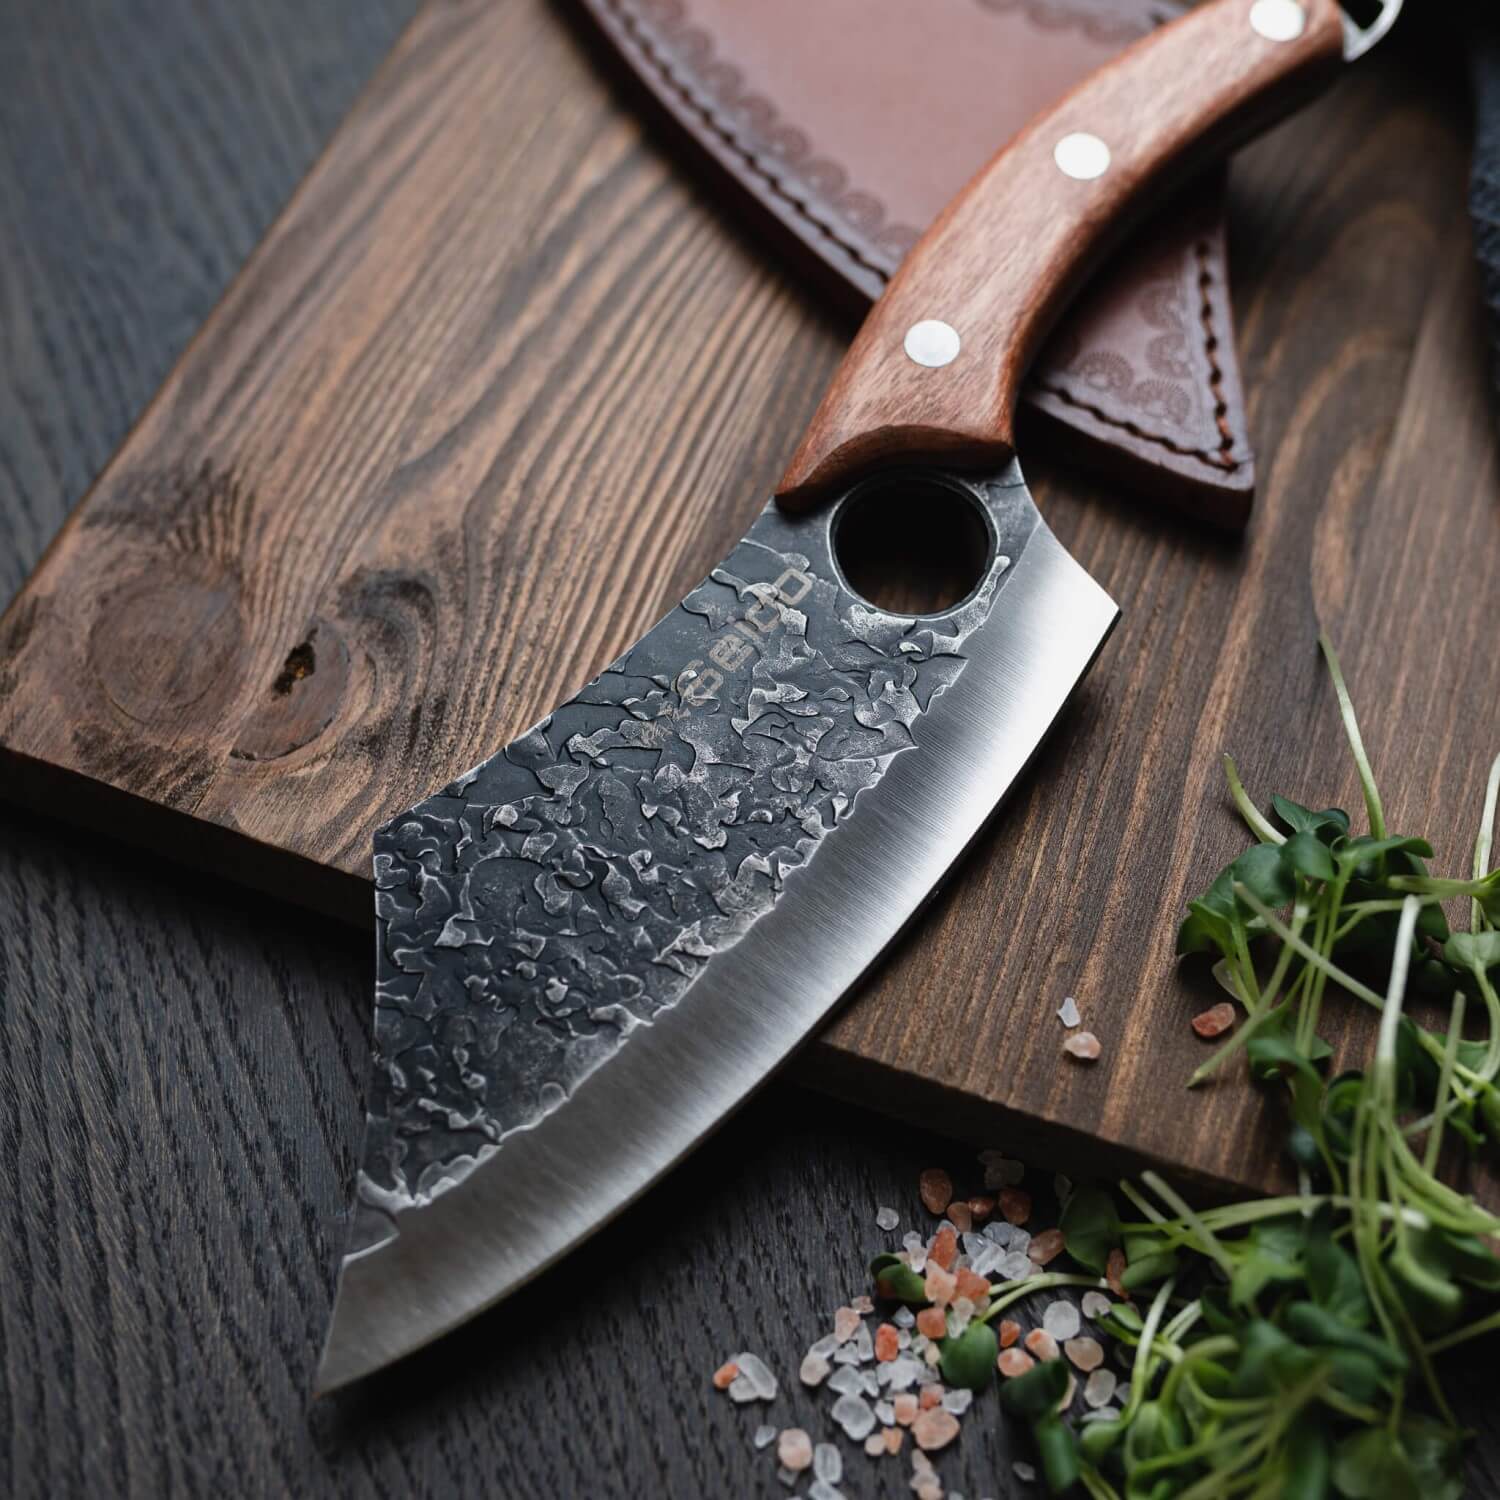 Behold the elegance of the Hakai Cleaver Knife from Seido Knives, with its wooden handle, poised on a cutting board. 